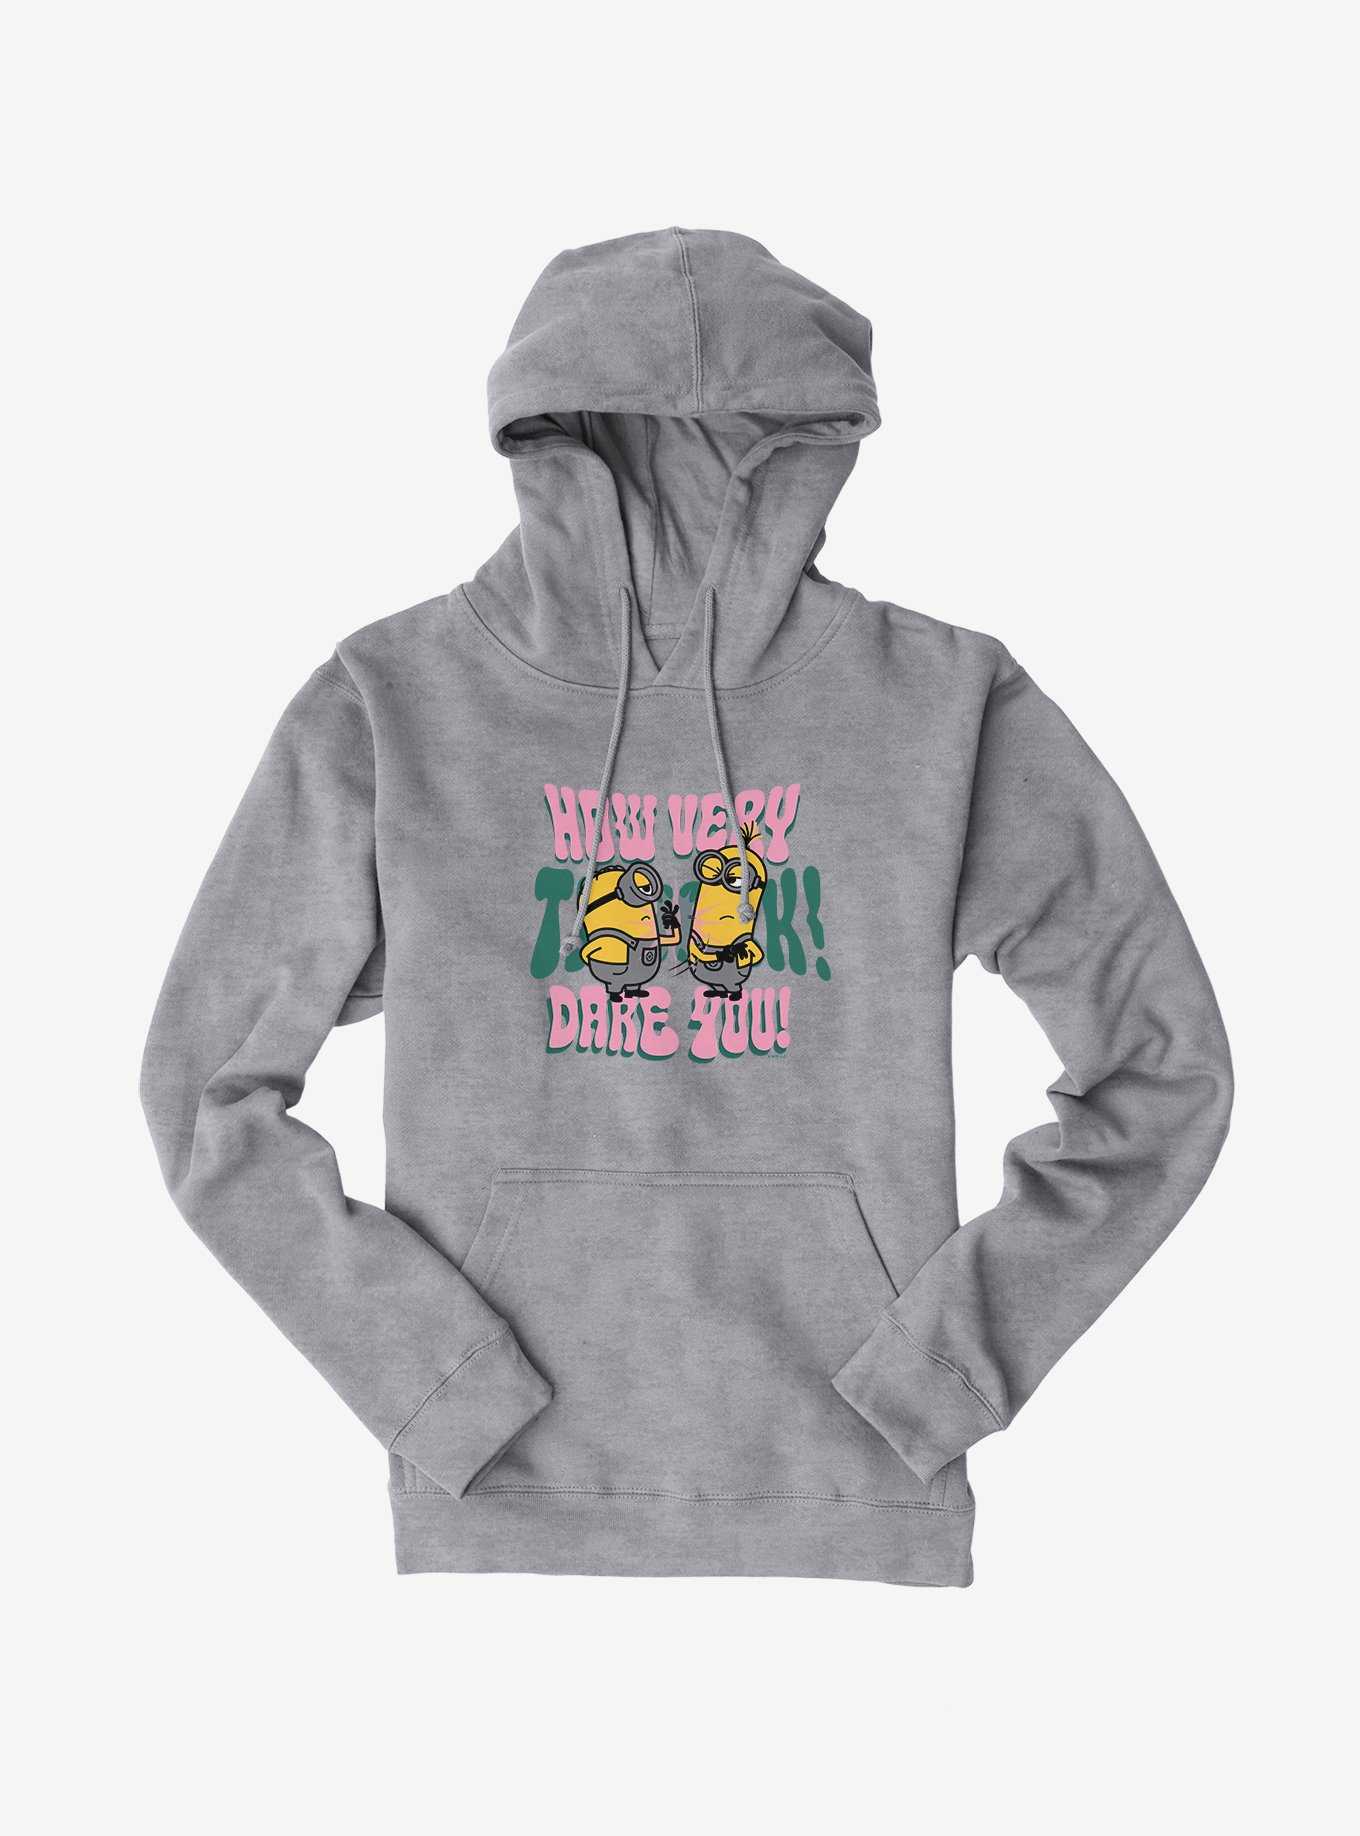 Minions Groovy How Dare You Hoodie, , hi-res